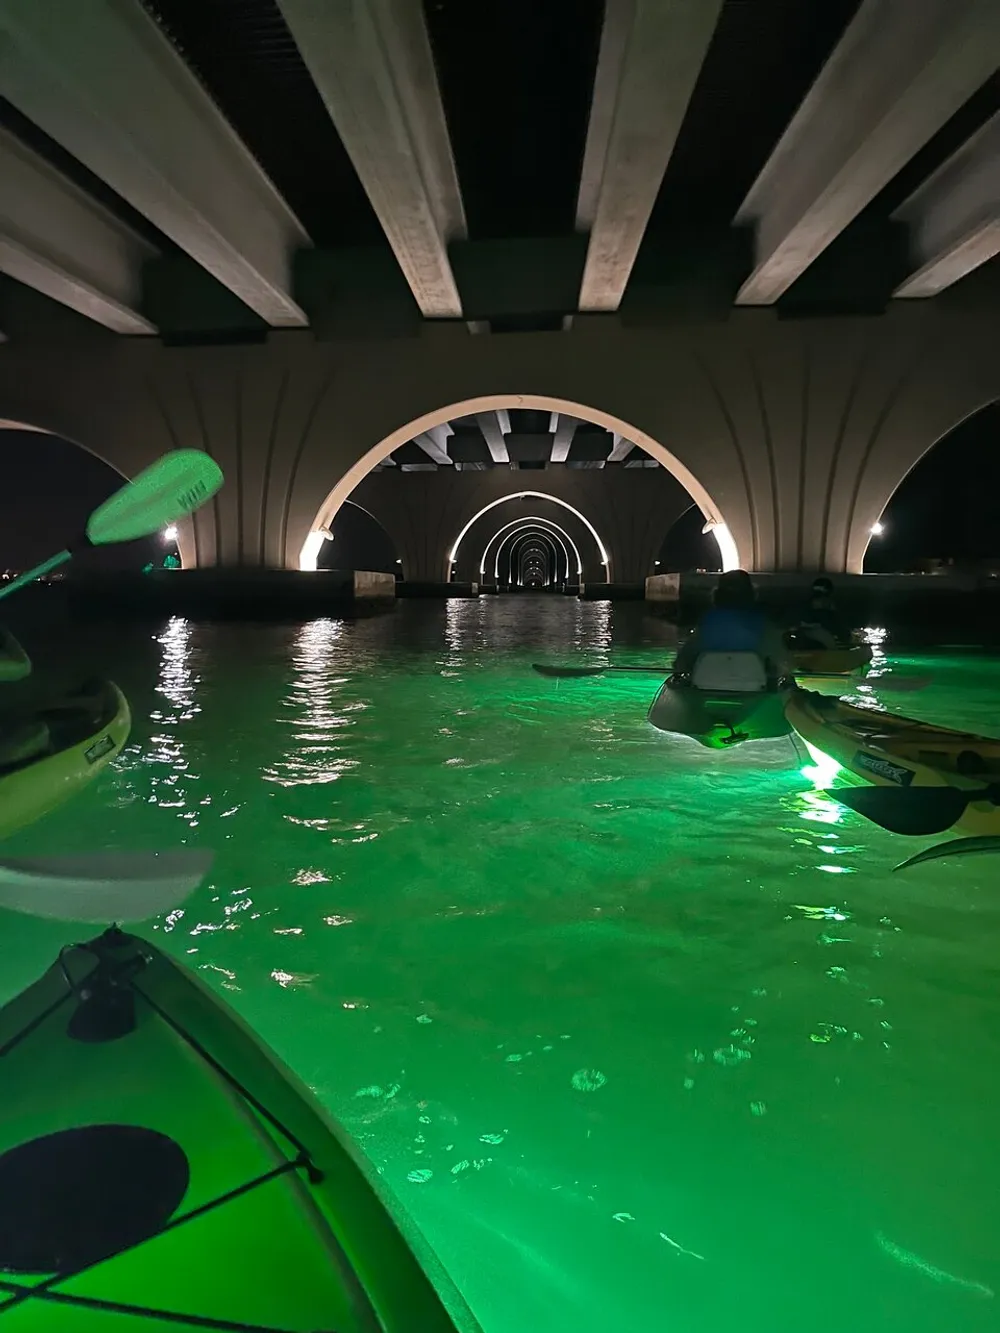 Kayakers paddle through a series of illuminated archways under a bridge at night with green lights casting a glow on the water beneath them